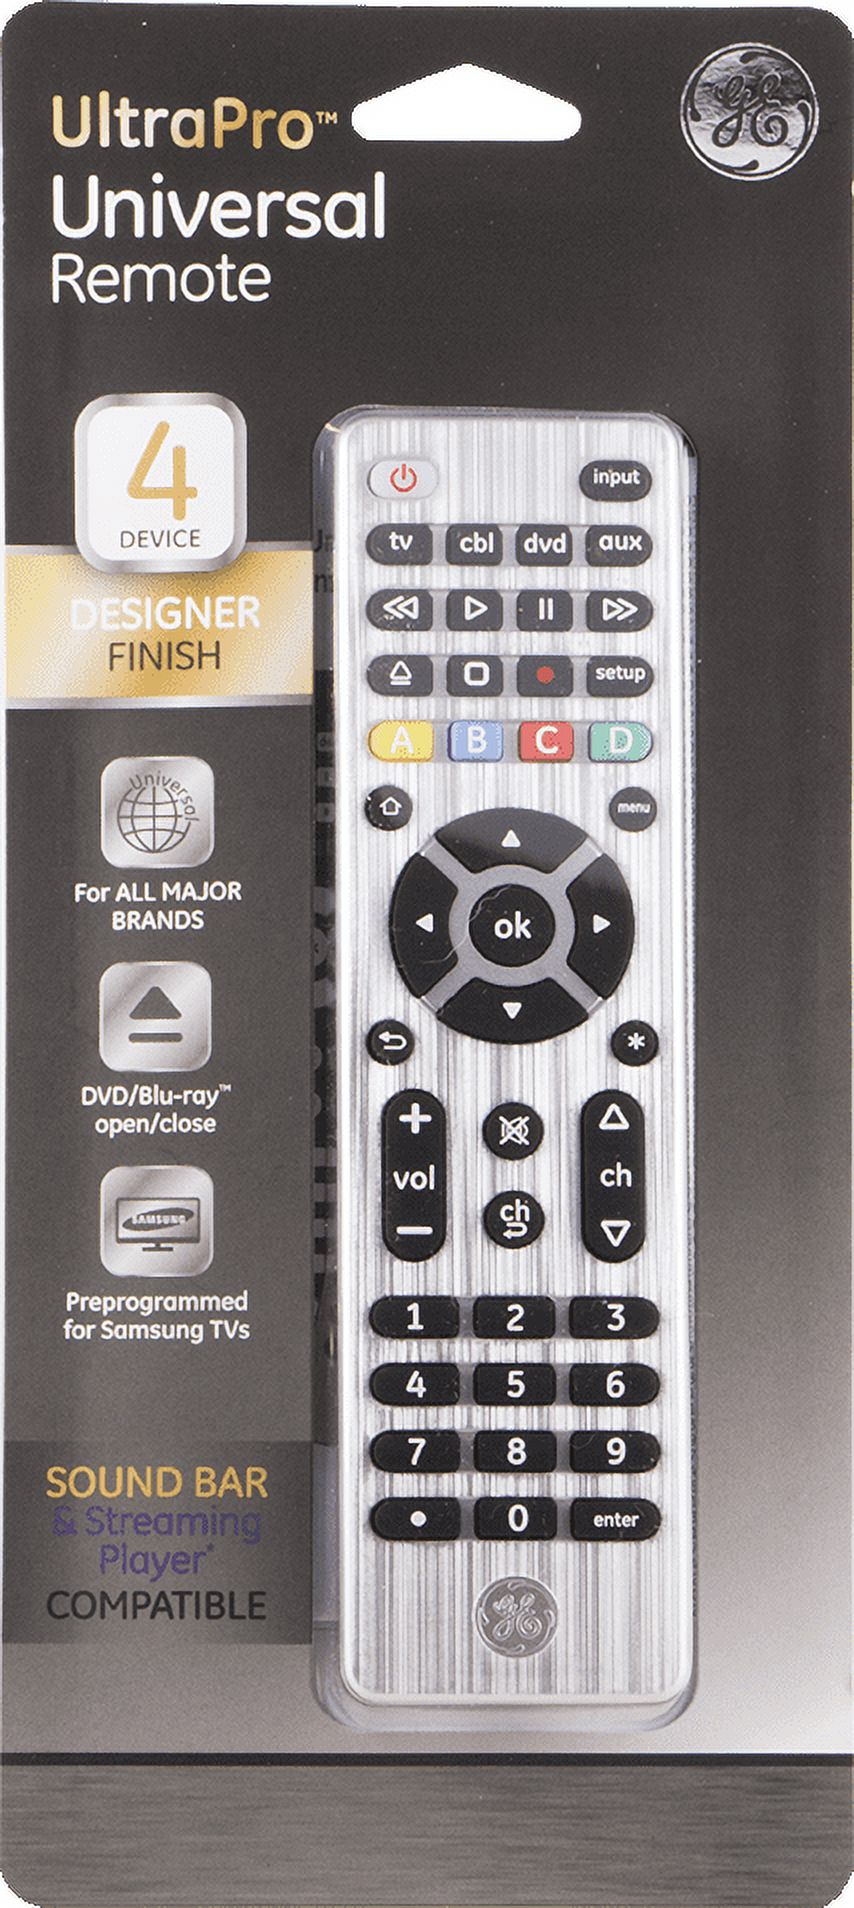 GE 4-Device Universal TV Remote Control in Brushed Silver, 33709 - image 3 of 10